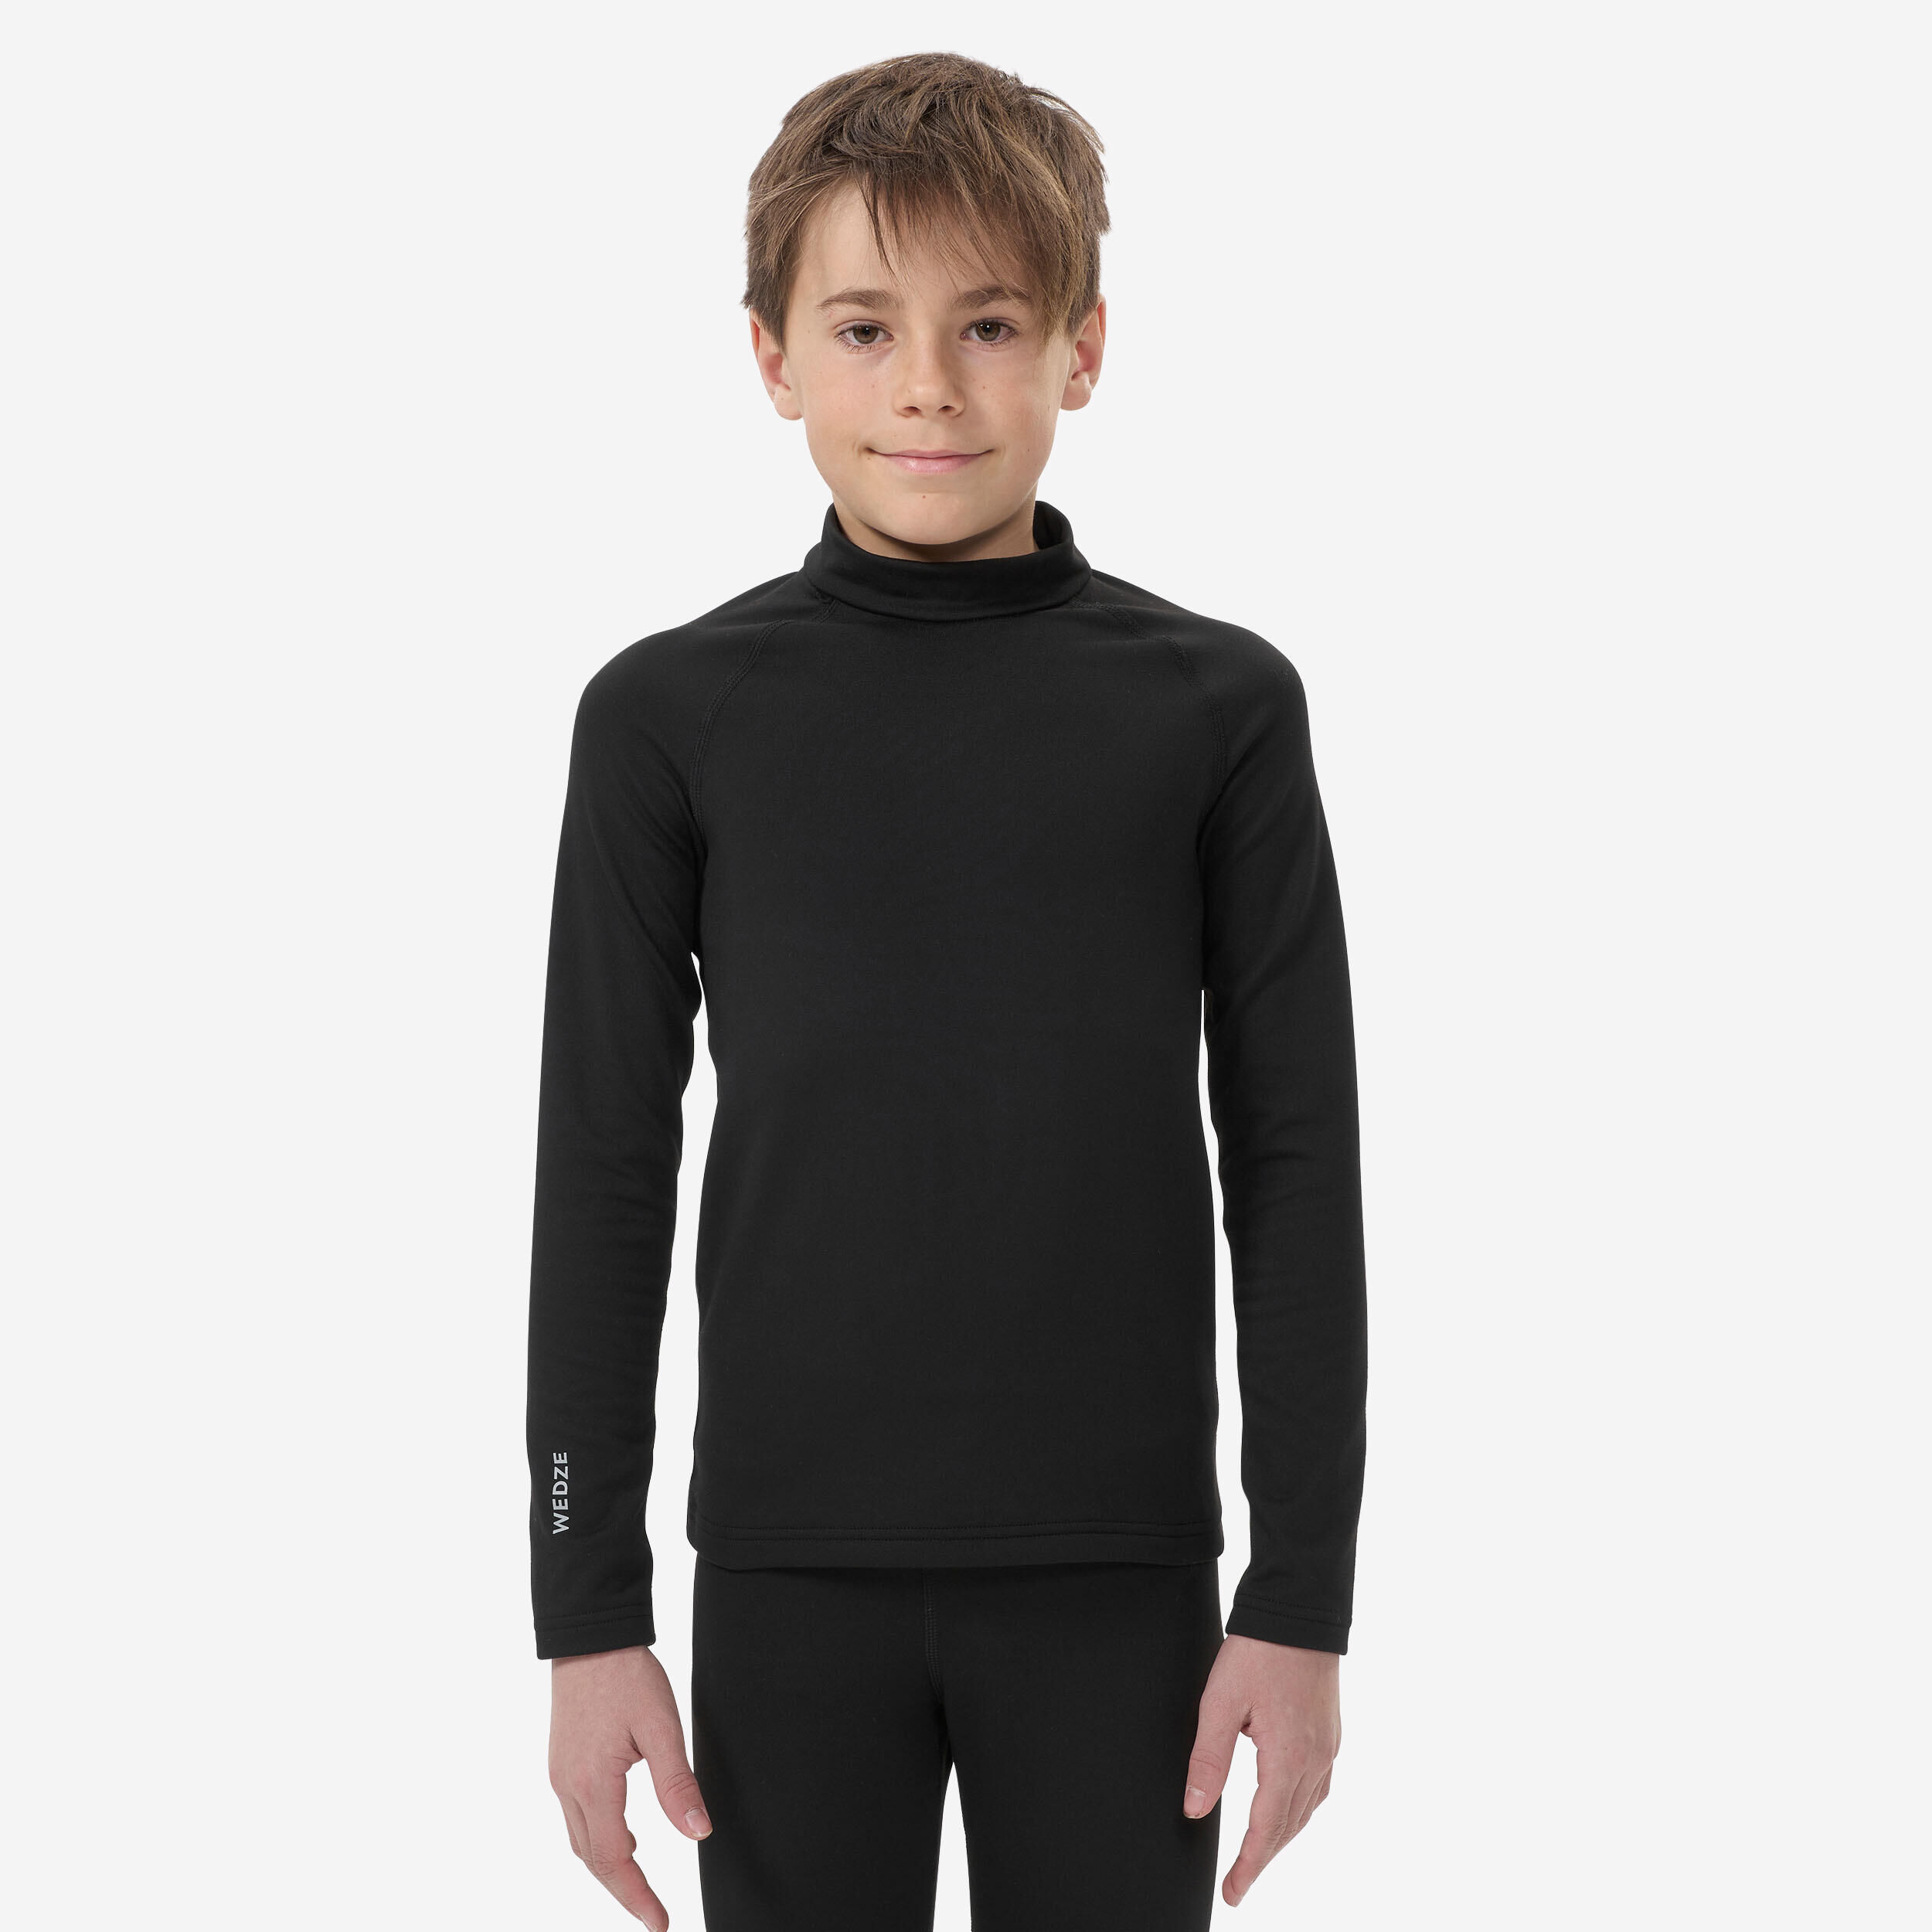 Kids' Thermal Leggings and Tights